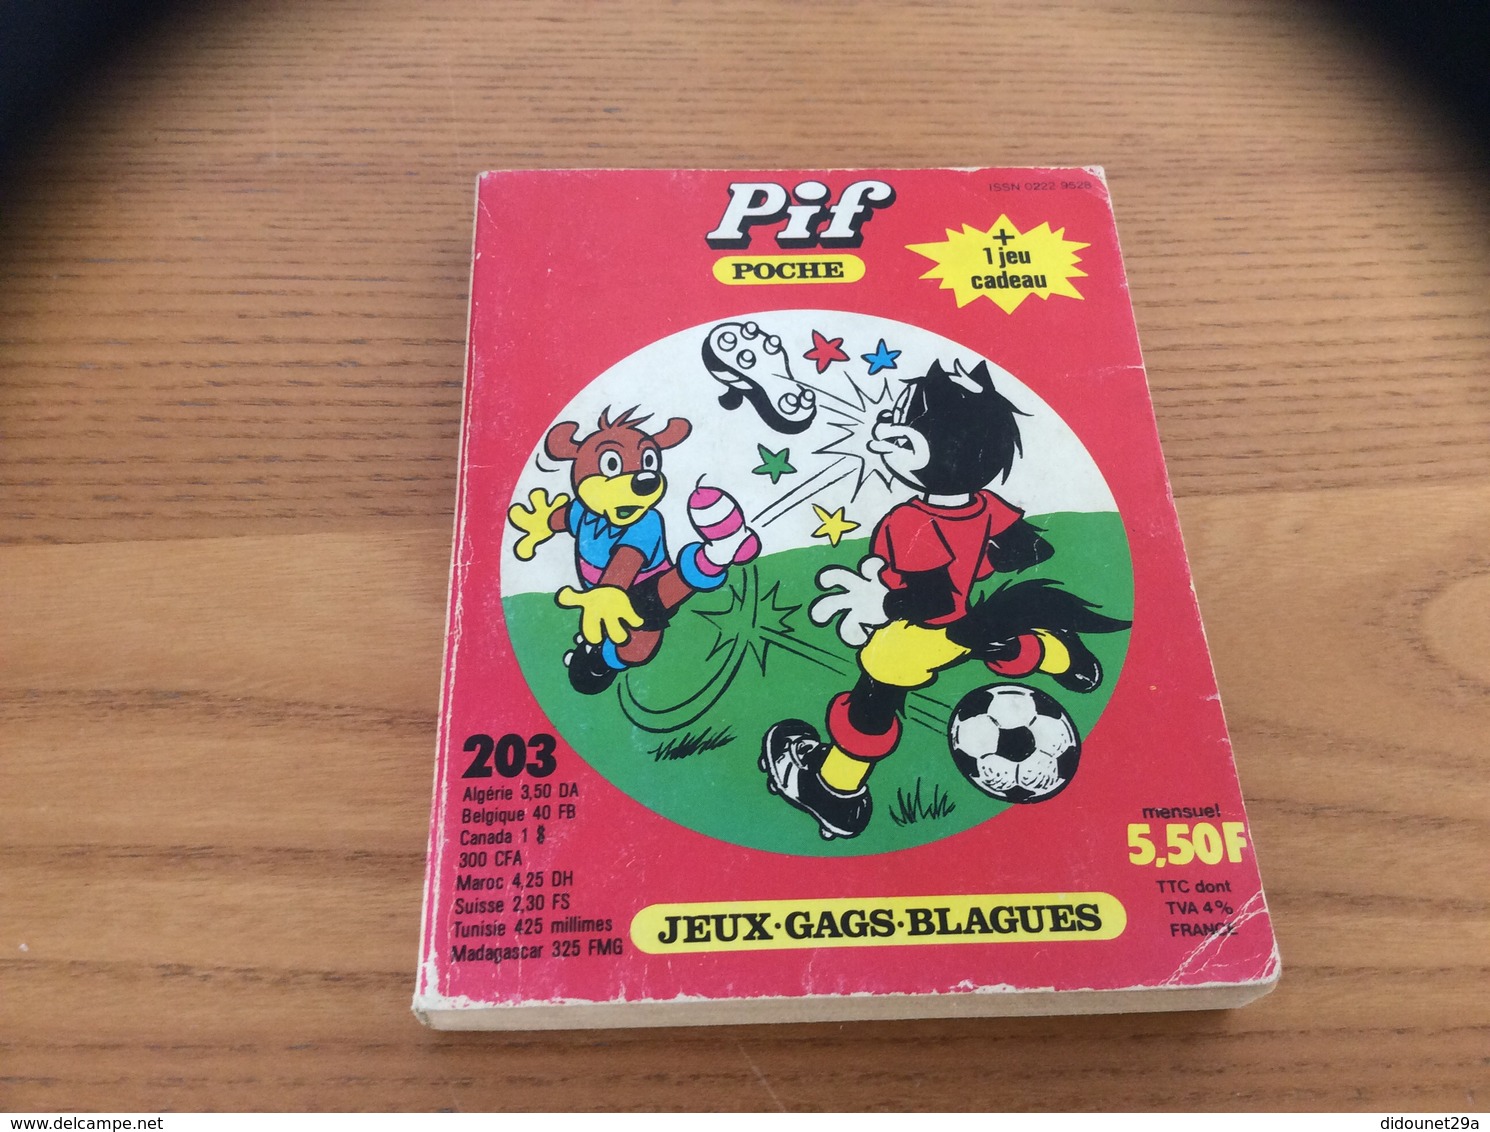 Pif POCHE N° 203 (166 Pages) 1982 - Other Magazines